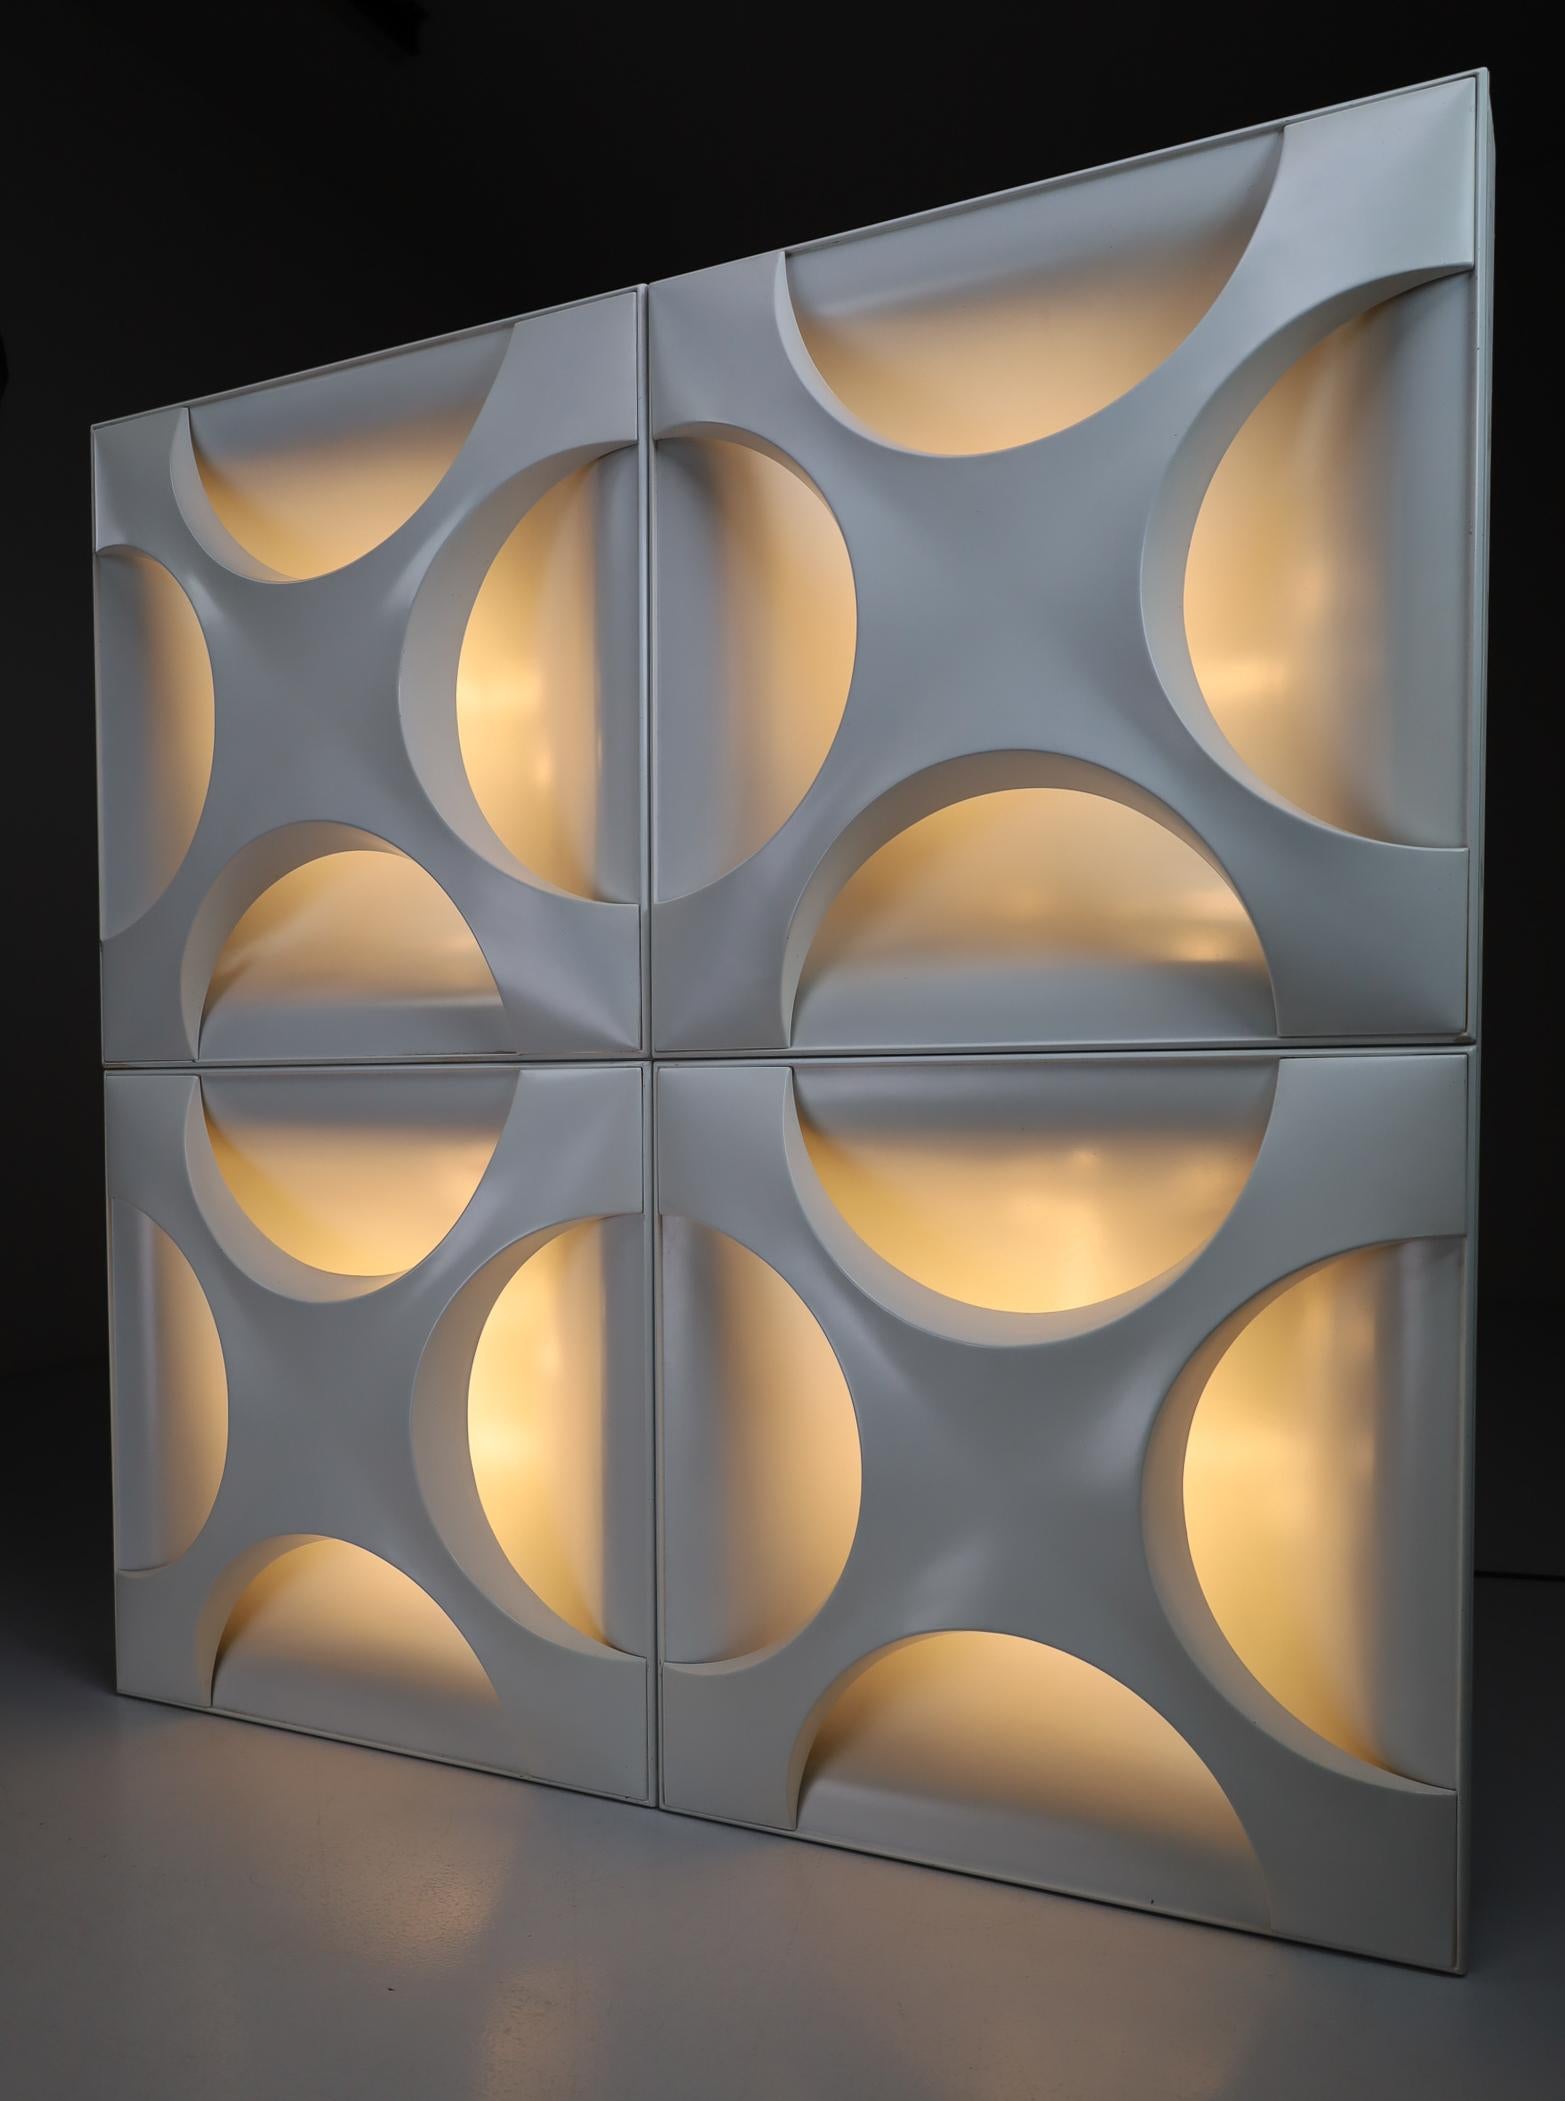 Large wall light sculpture designed by Dieter Witte and Rolf Krüger for Staff Leuchten, Germany, 1968.

Overwhelming oyster lacquer white wall light sculpture size 1.25 meter x 1.25 meter. 4 oyster elements built in a wooden frame to be arranged